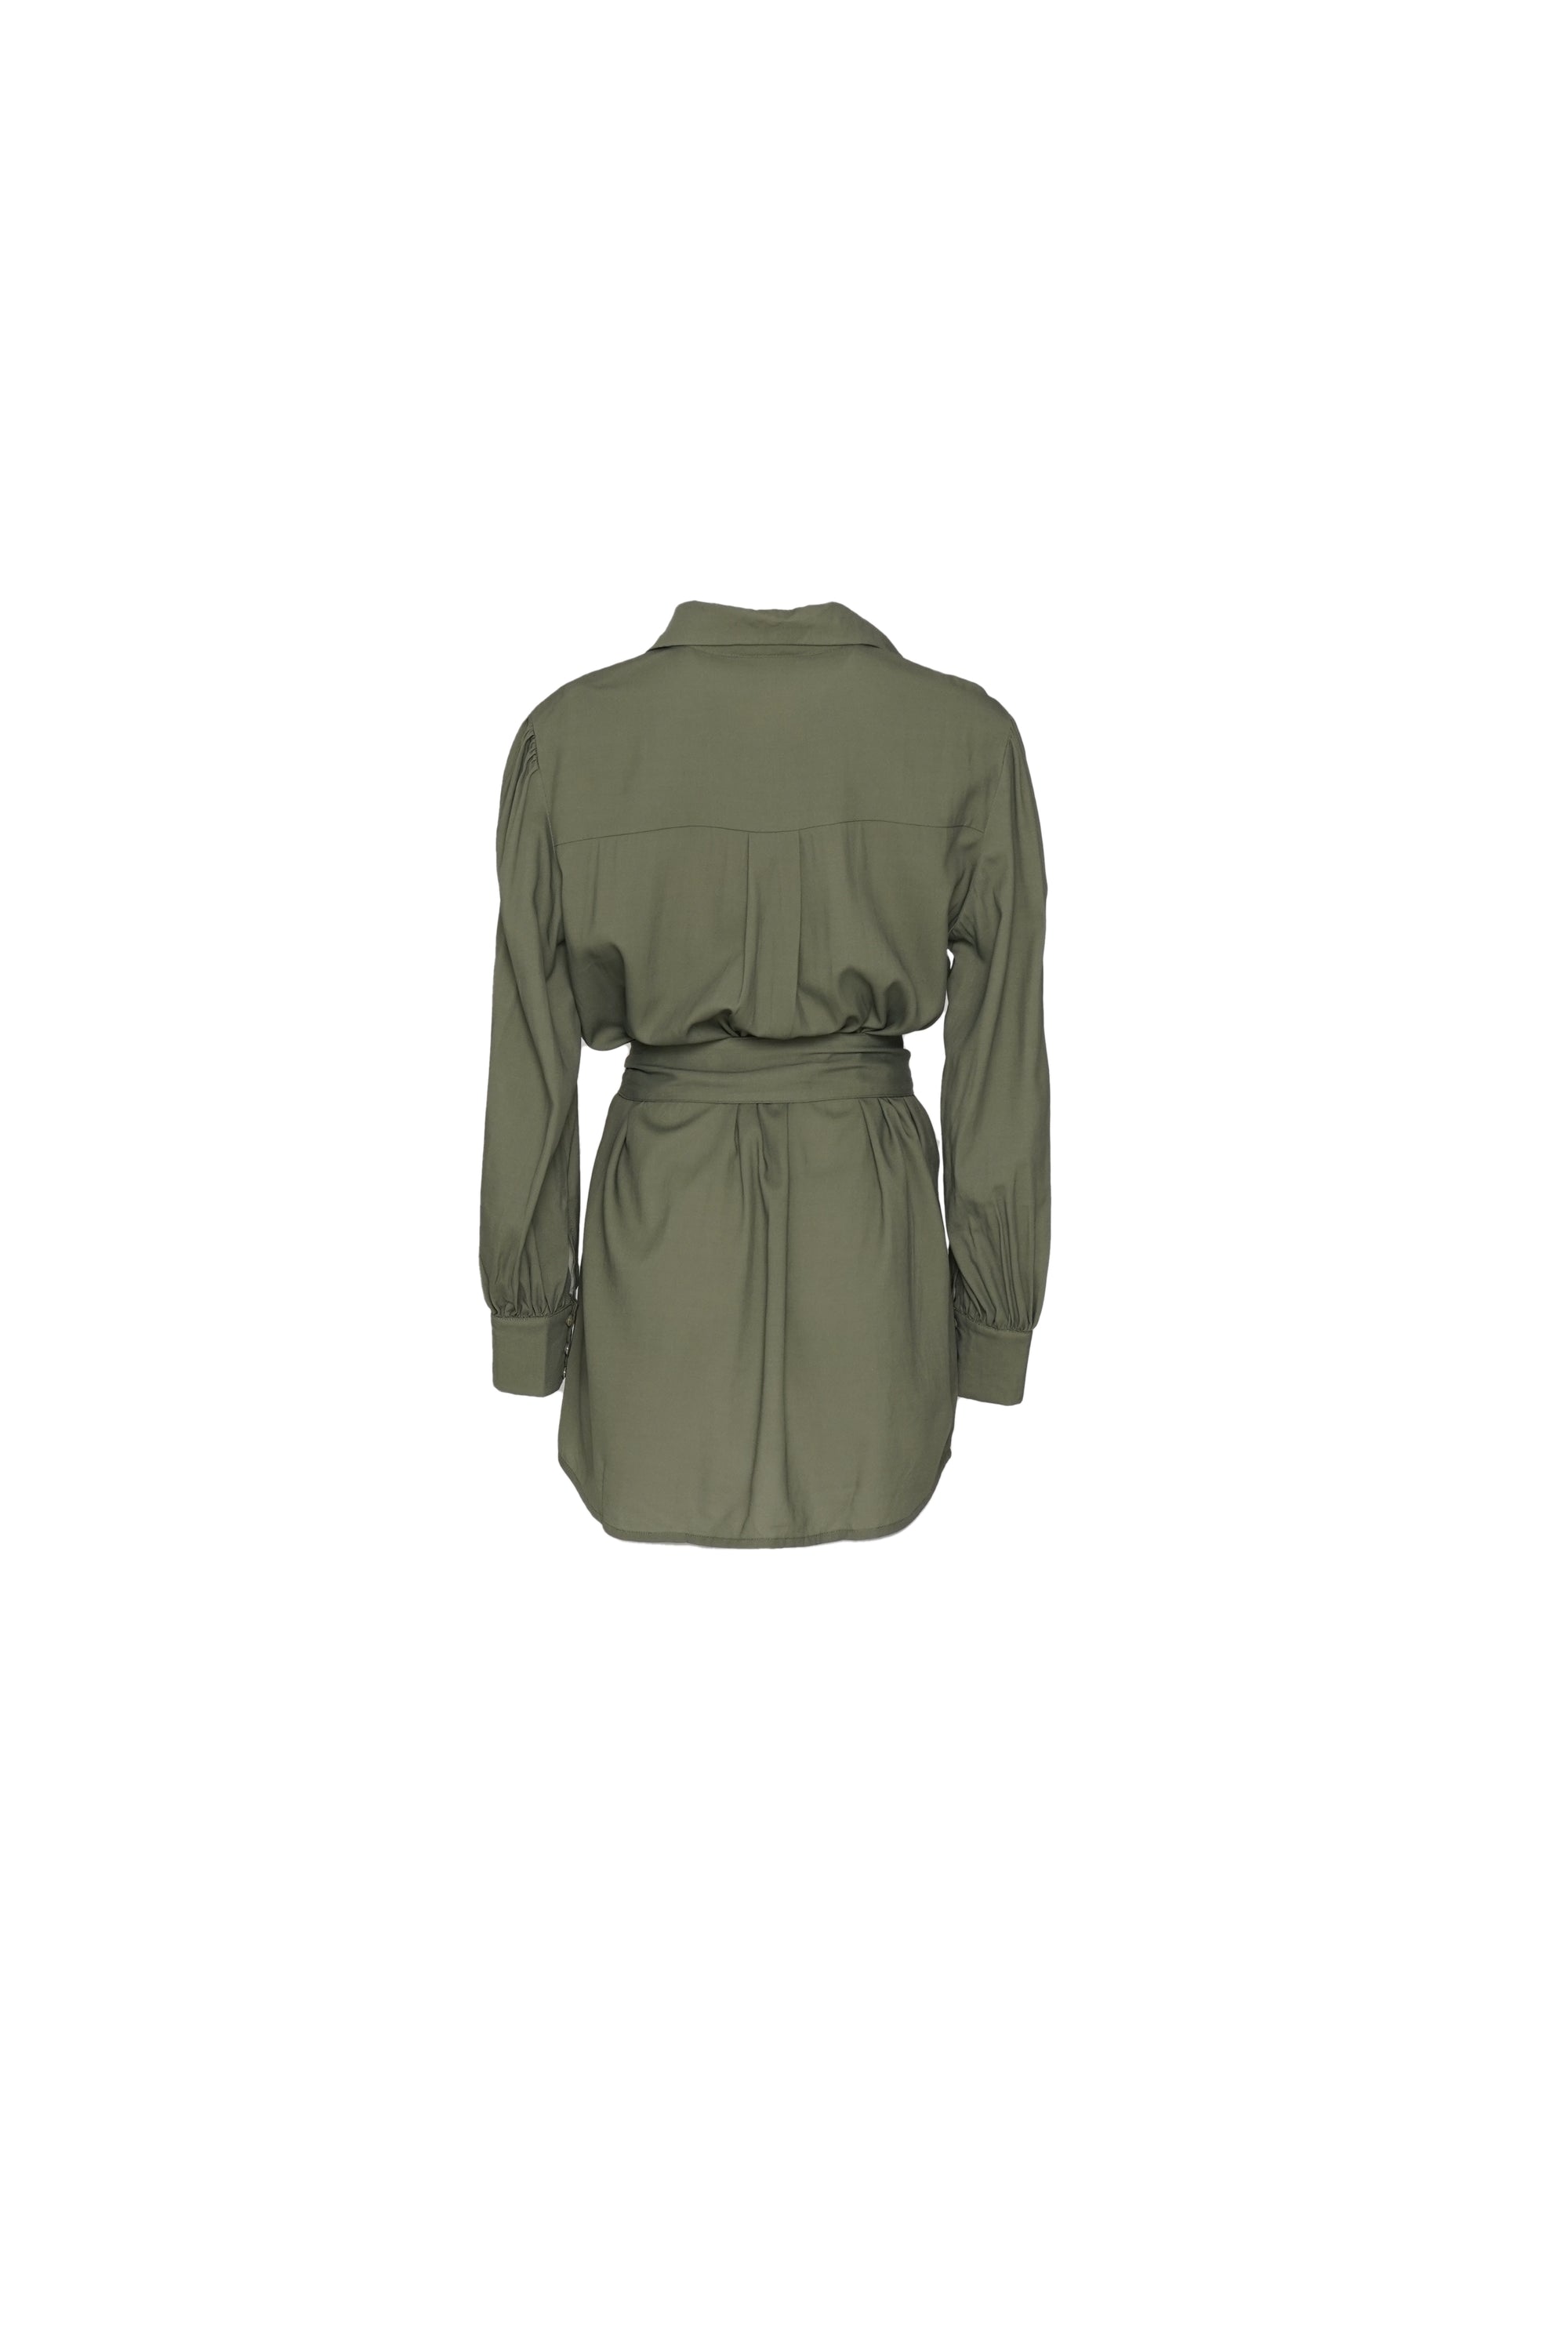 Back view of silky-feel olive green shirt dress